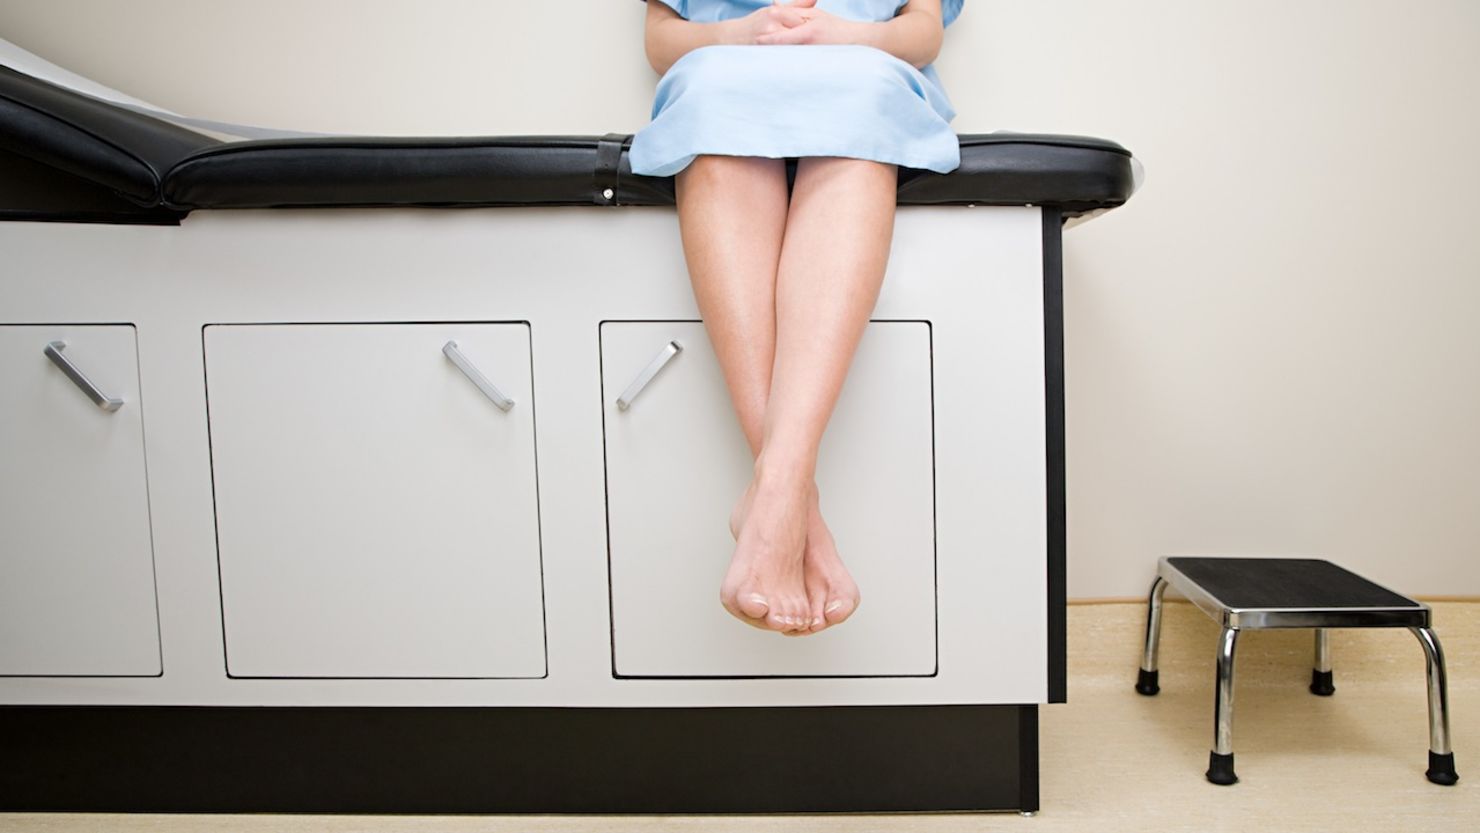 If you notice something in your doctor's behavior that doesn't seem right, speak up.